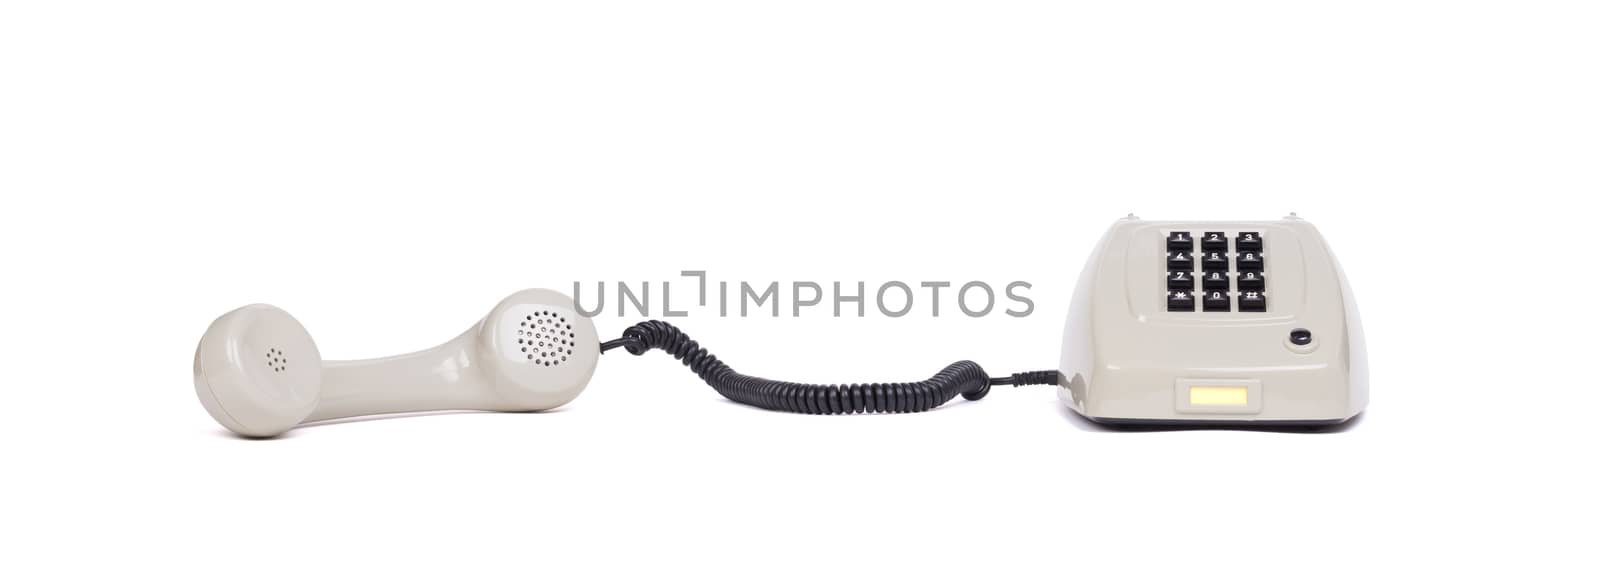 Vintage grey telephone with a white background